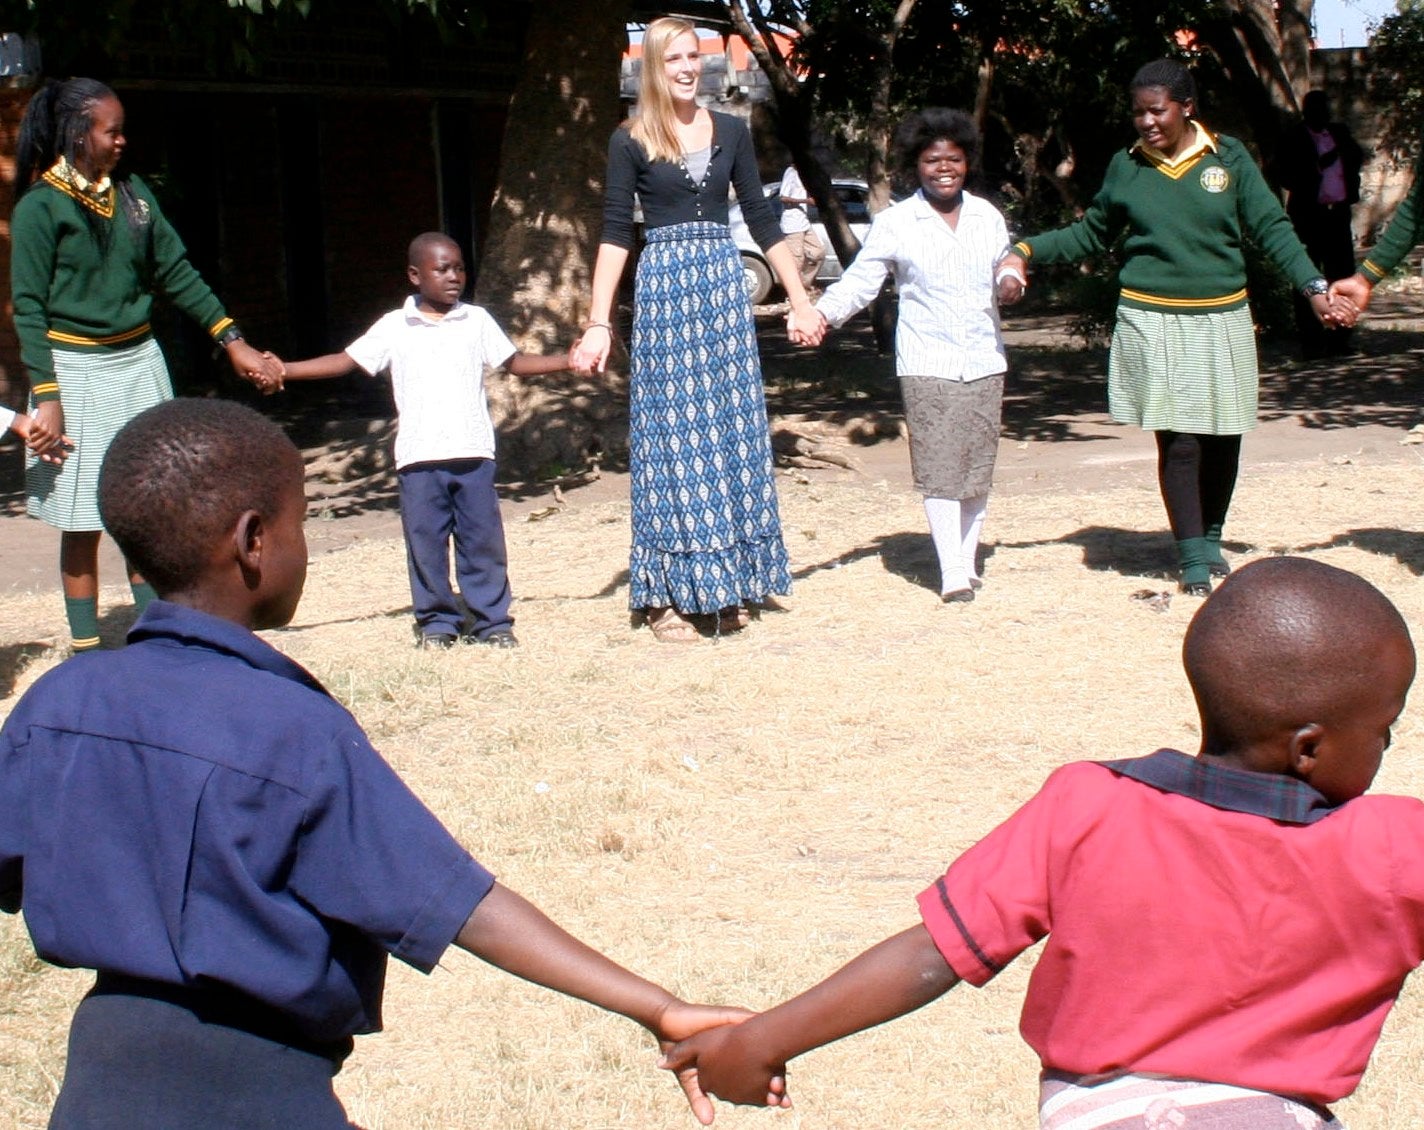 Rachel holding hands with Zambian children in a circle